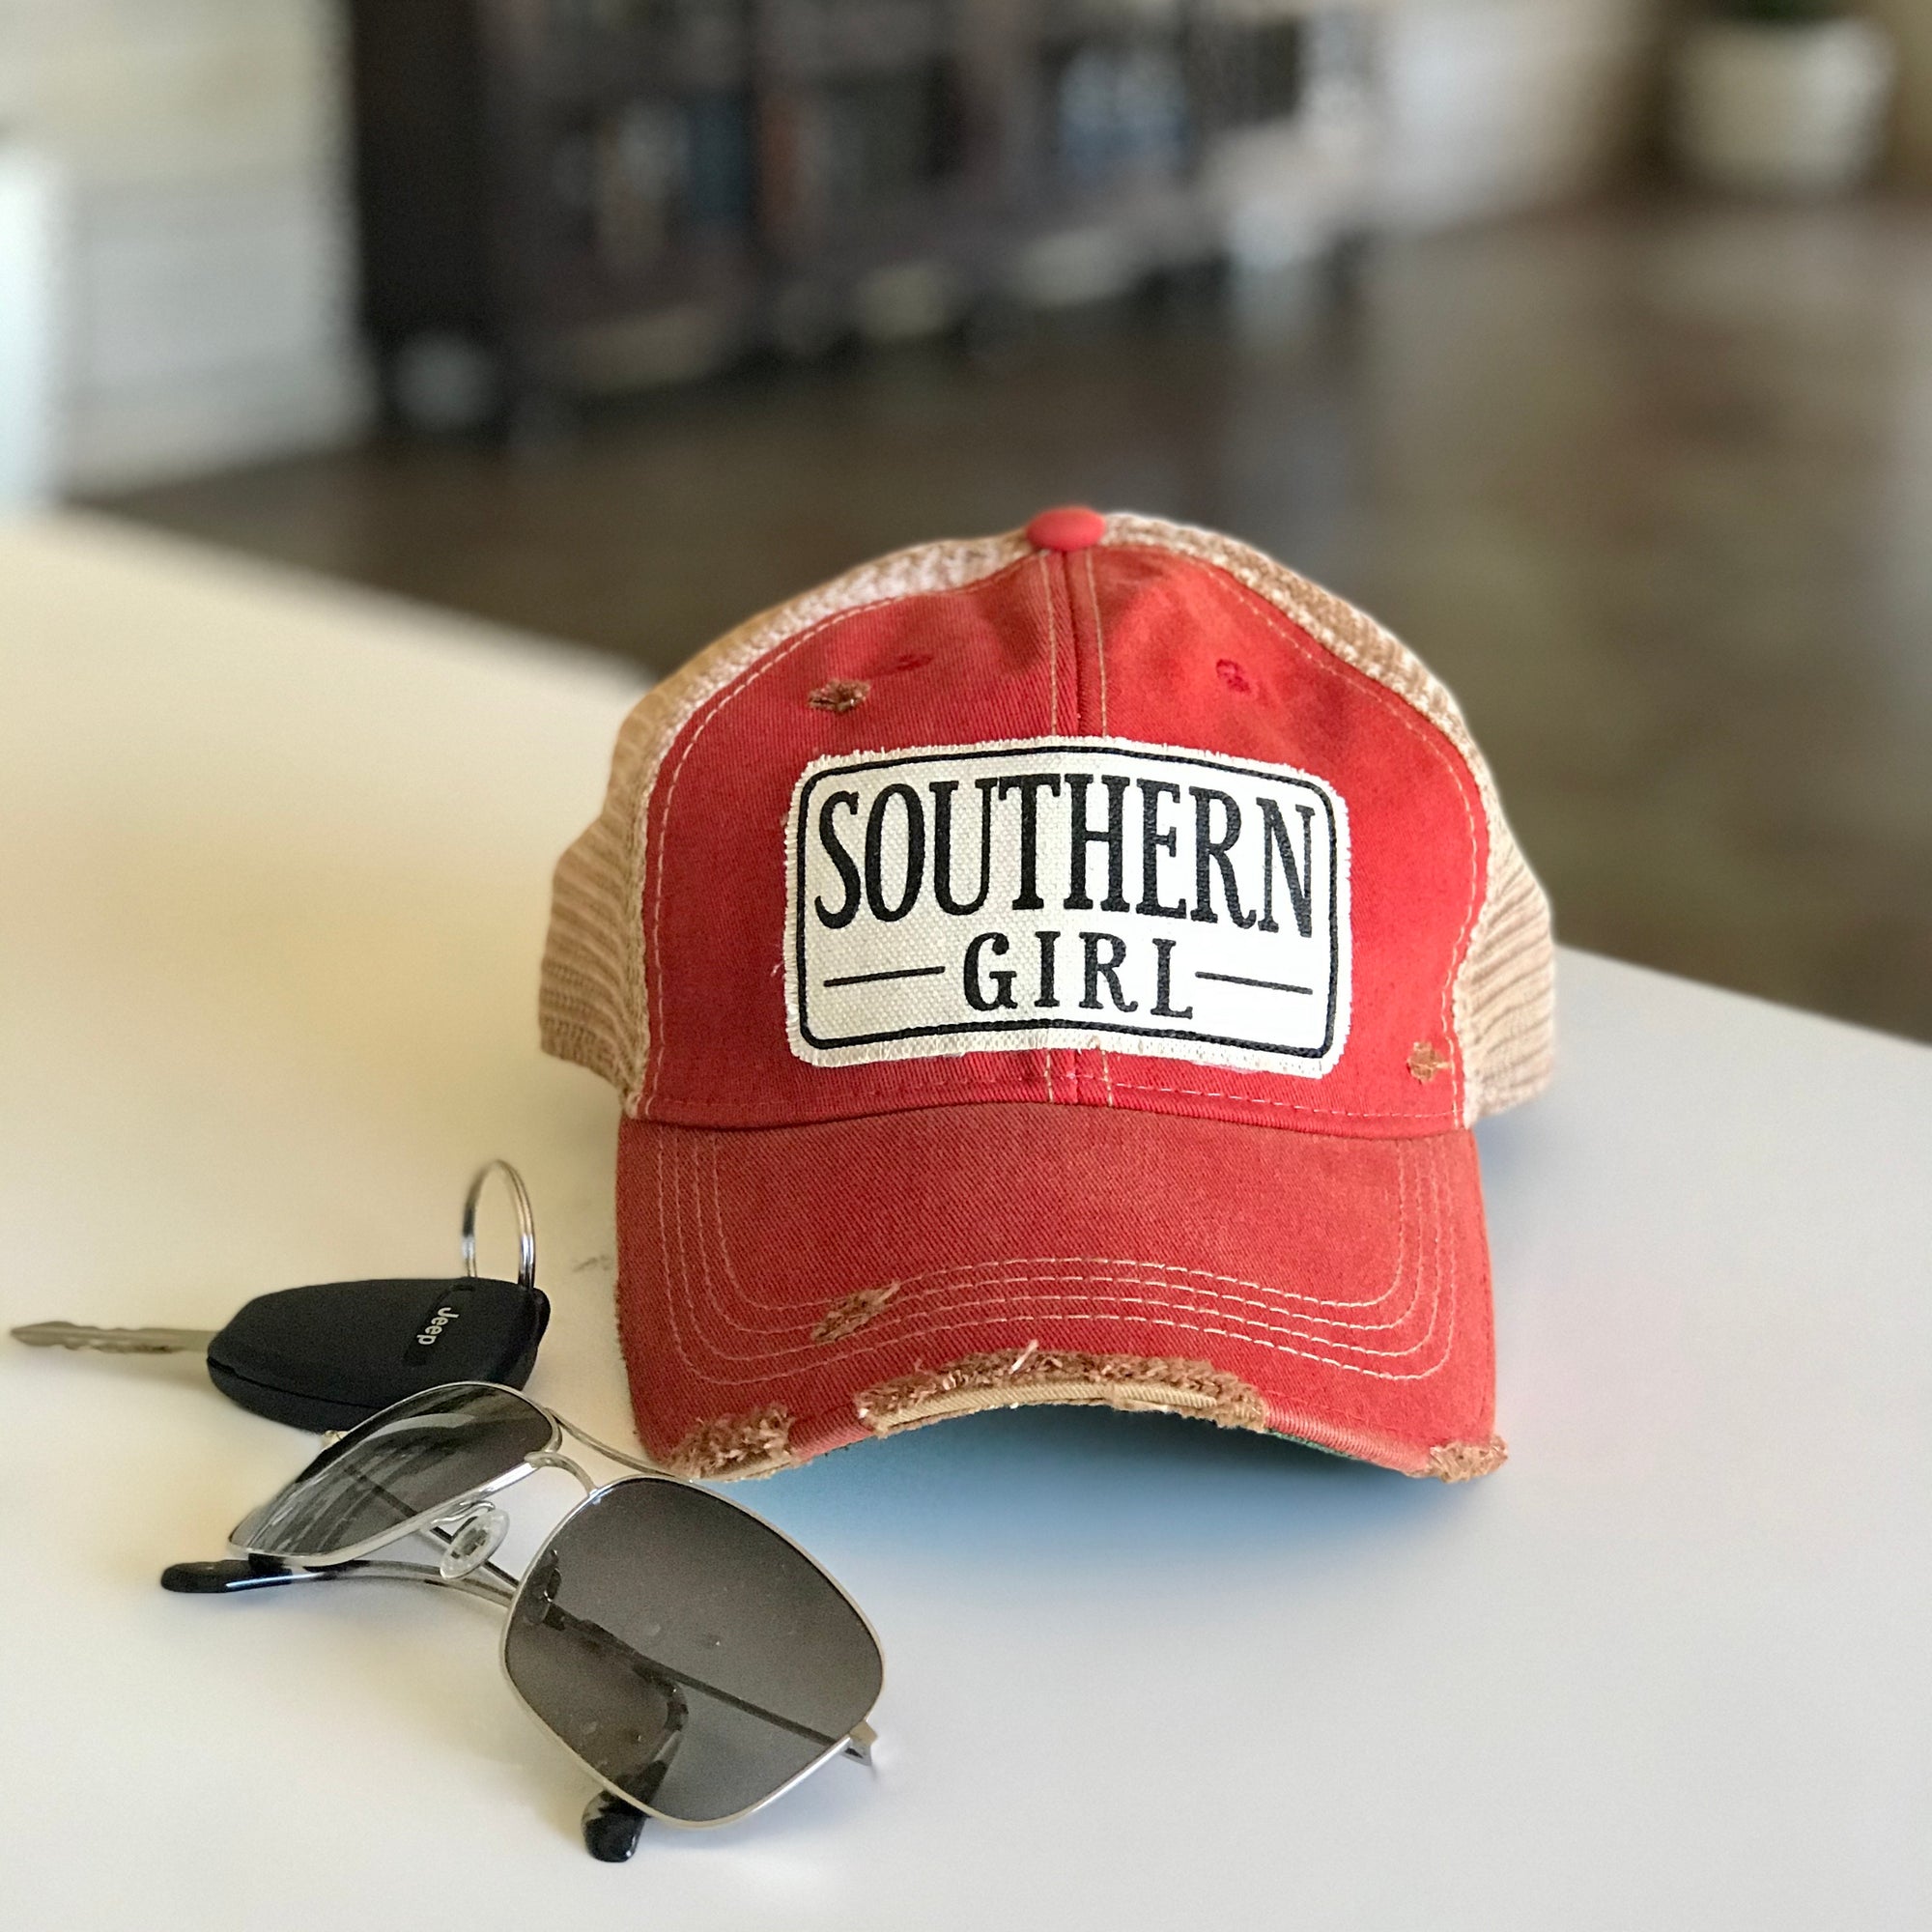 southern girl distressed trucker hat, southern girl vintage style trucker cap, southern girl baseball cap, southern girl baseball hat